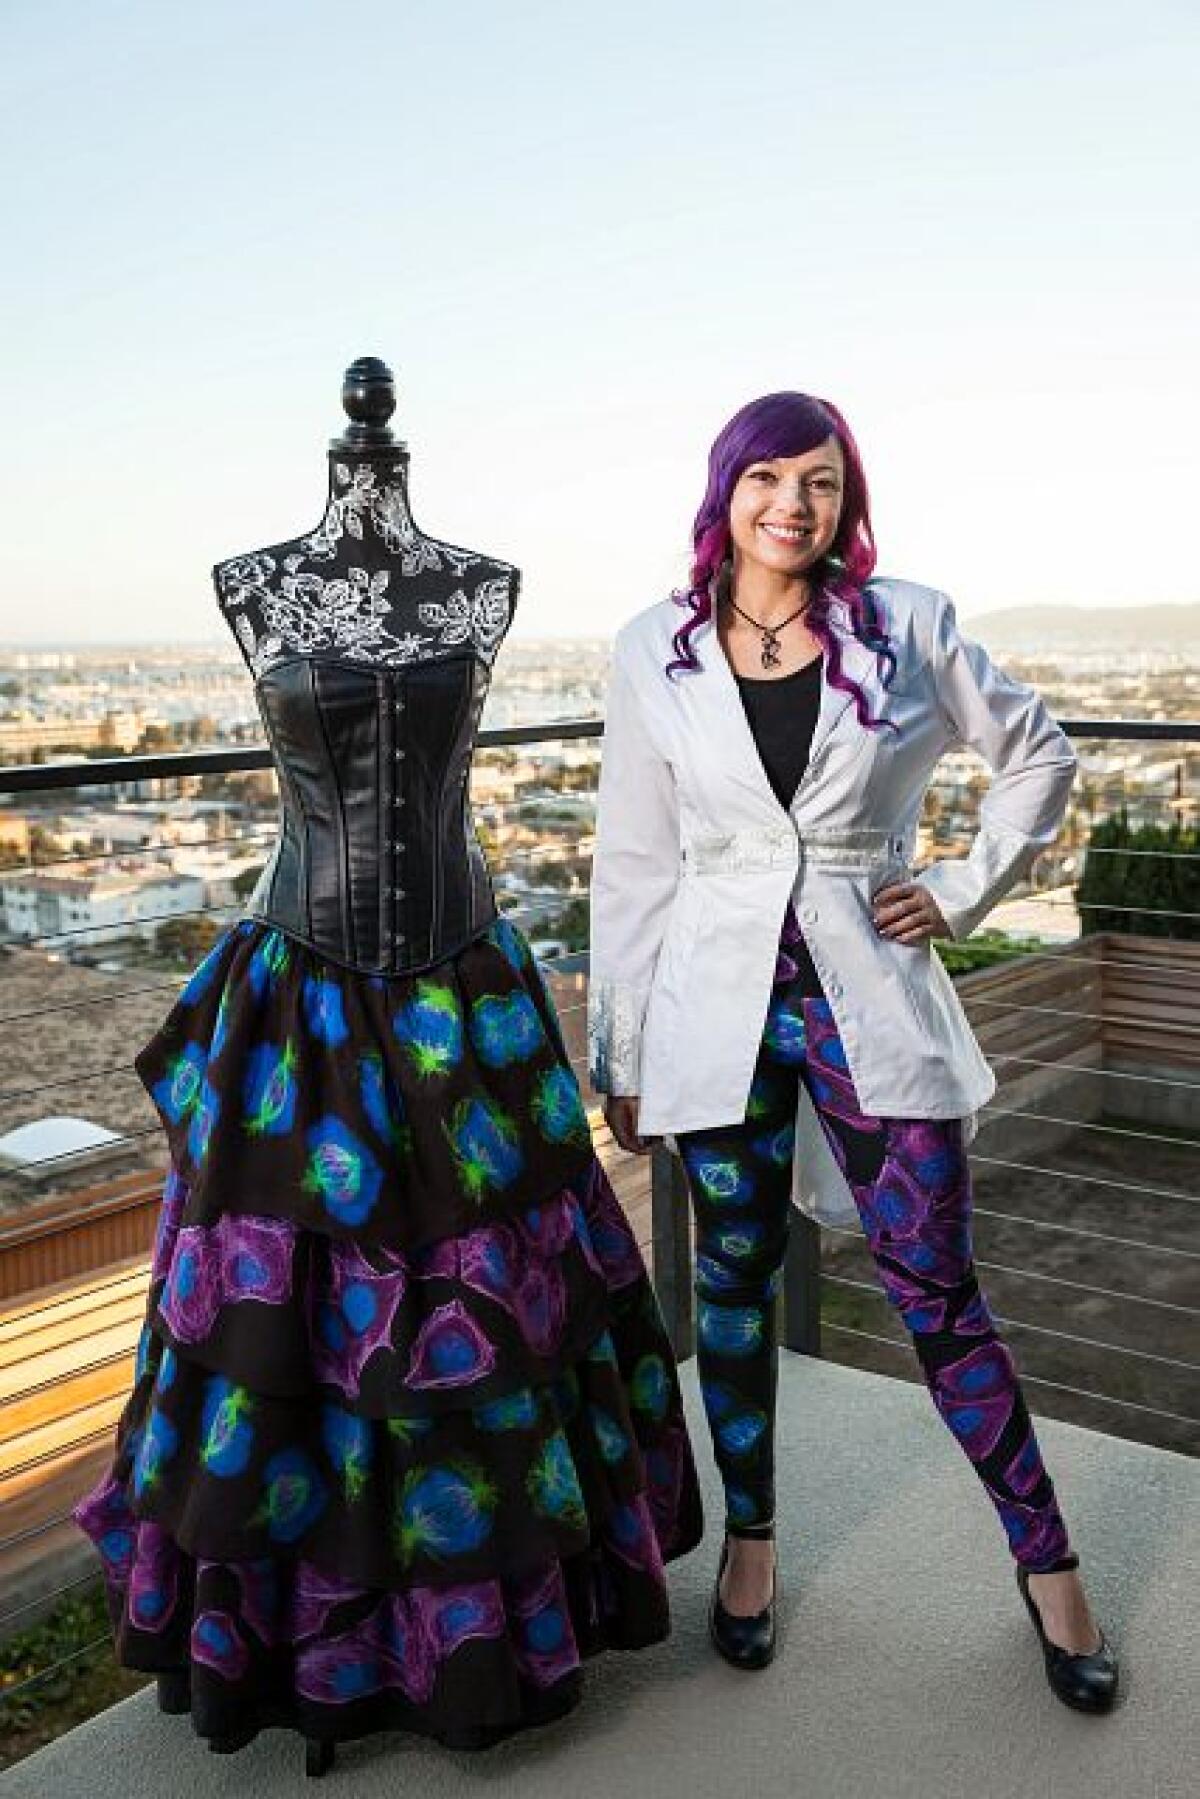 Molecular biologist Beata Mierzwa makes clothing and other items out of fabric she designed with images of cell division.